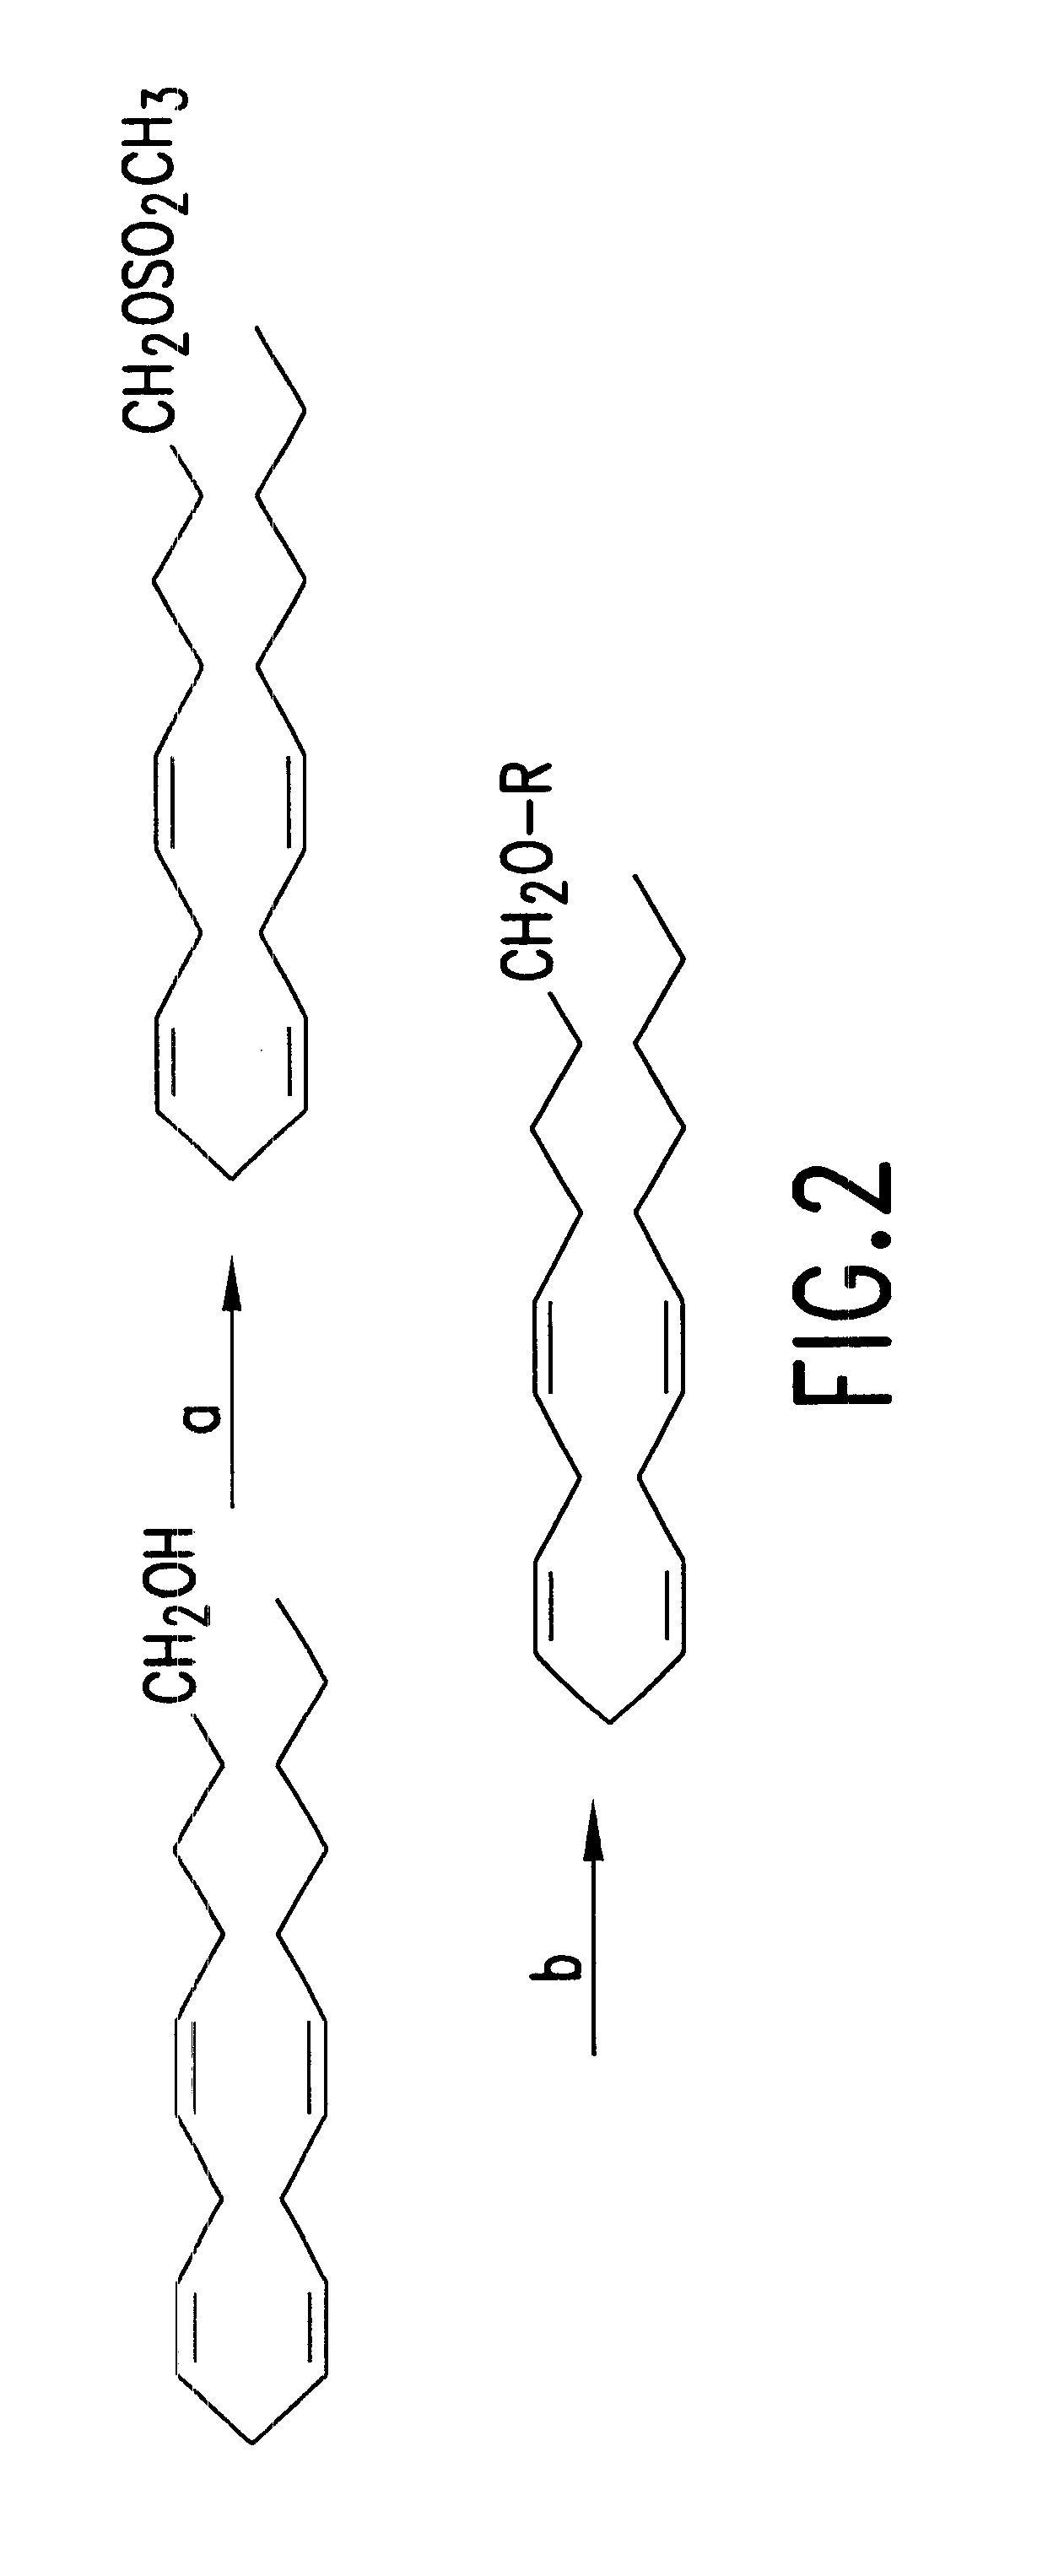 Synthetic endogenous cannabinoids analogues and uses thereof